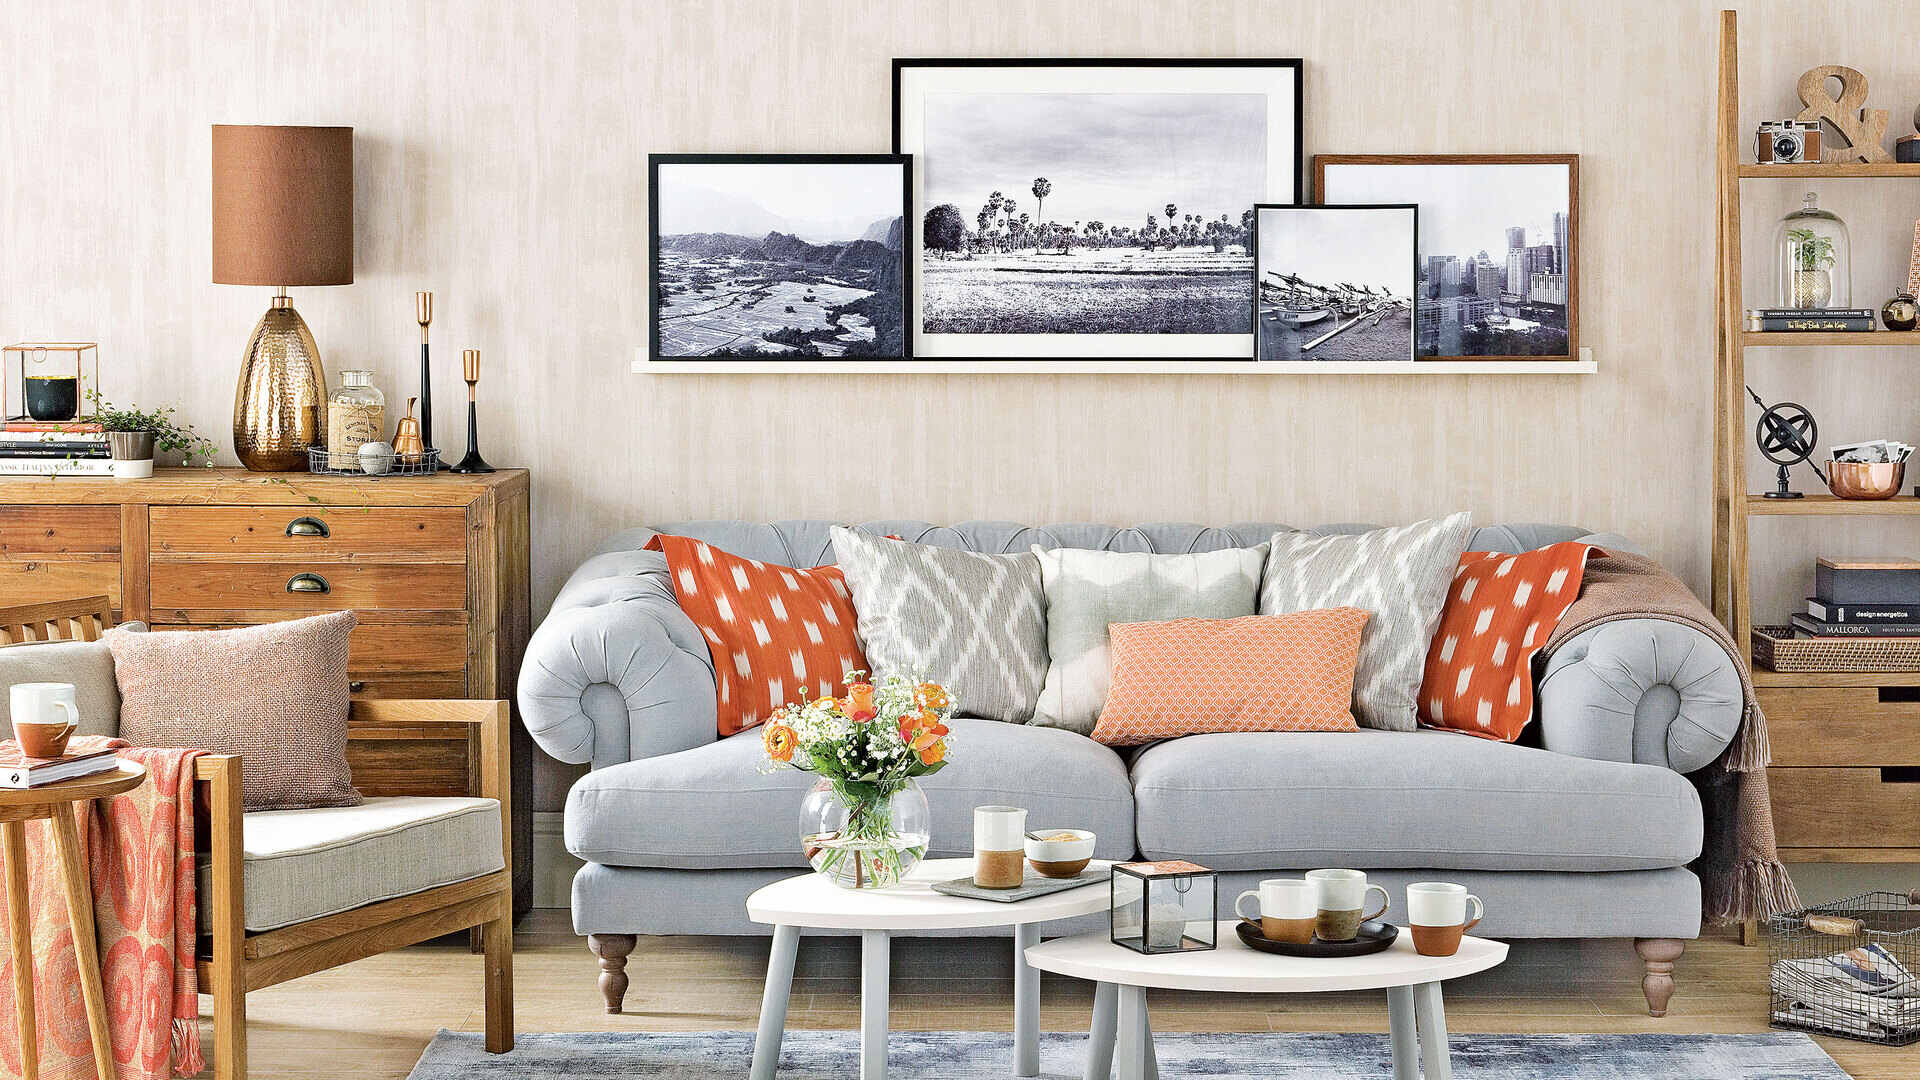 How To Decorate Living Room Walls